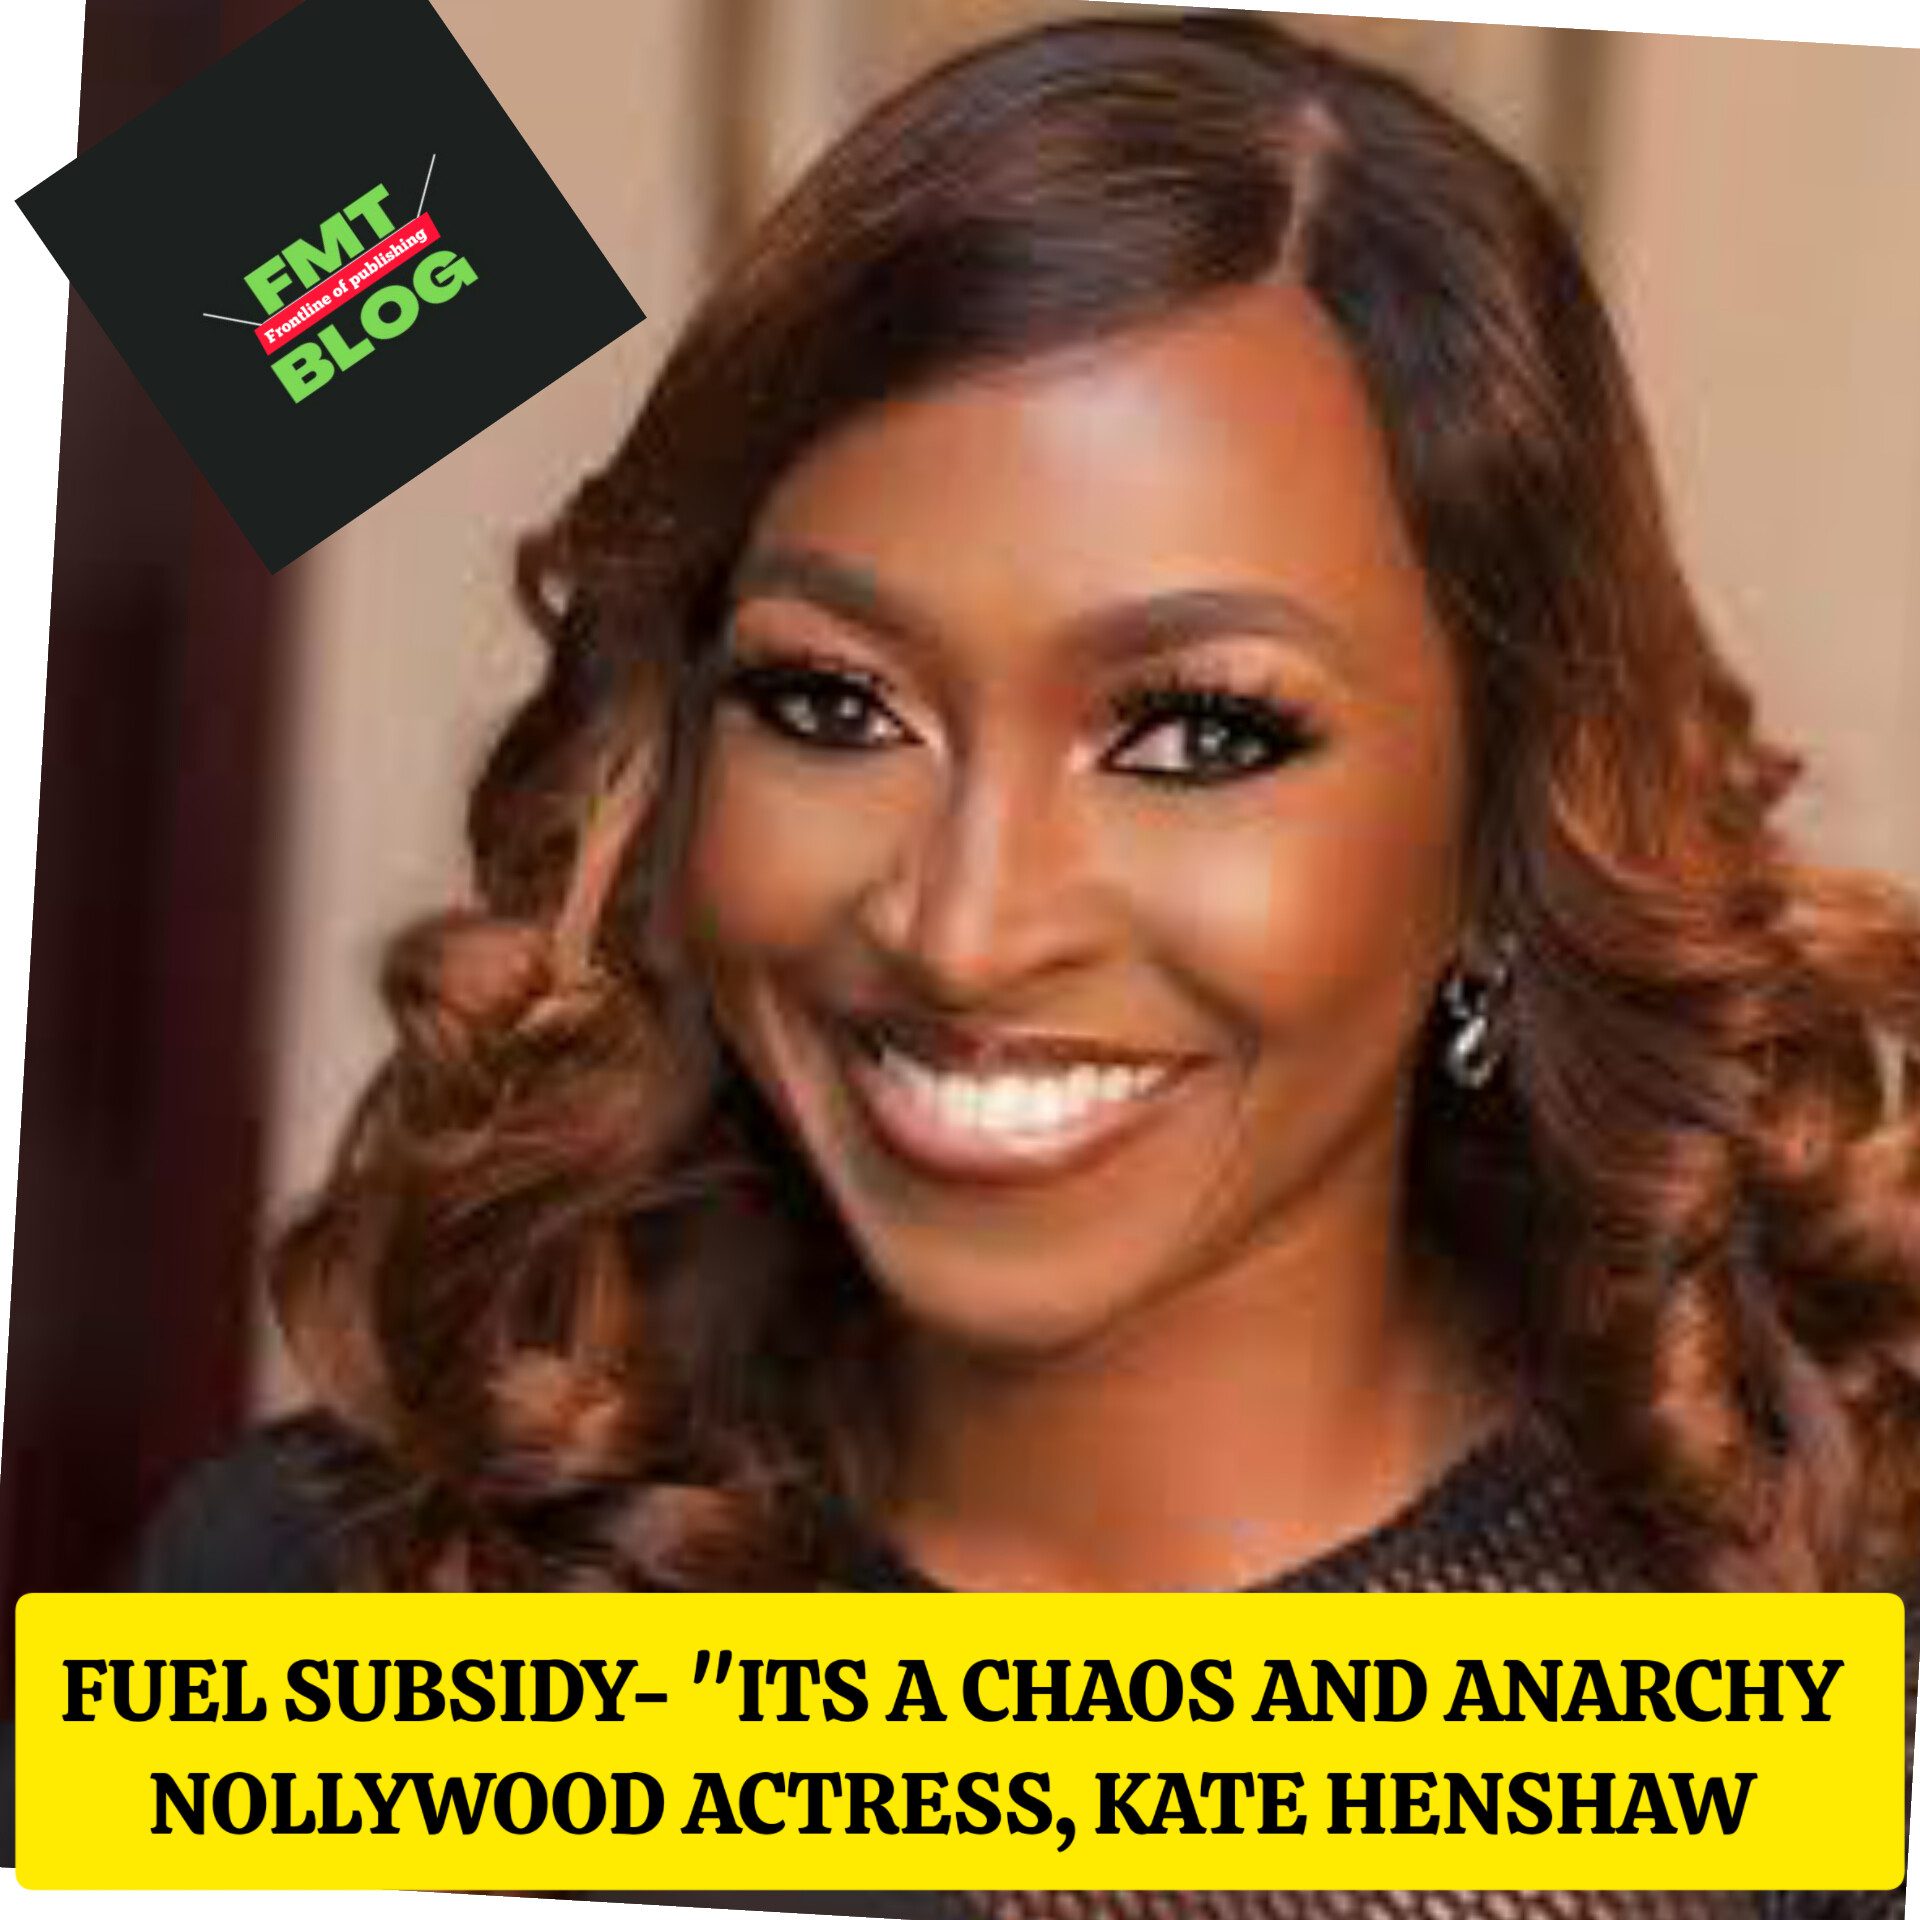 Fuel Subsidy- ”It’s a chaos and anarchy”- Nollywood Actress, Kate Henshaw